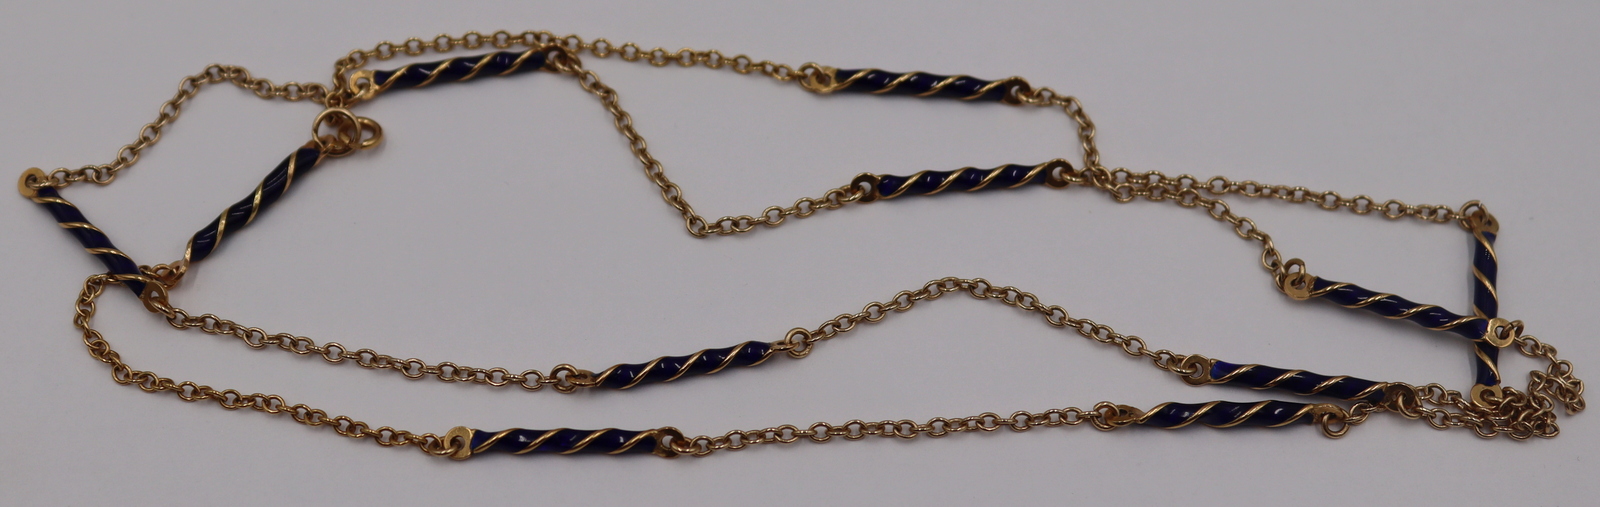 JEWELRY. 14KT GOLD AND BLUE ENAMEL